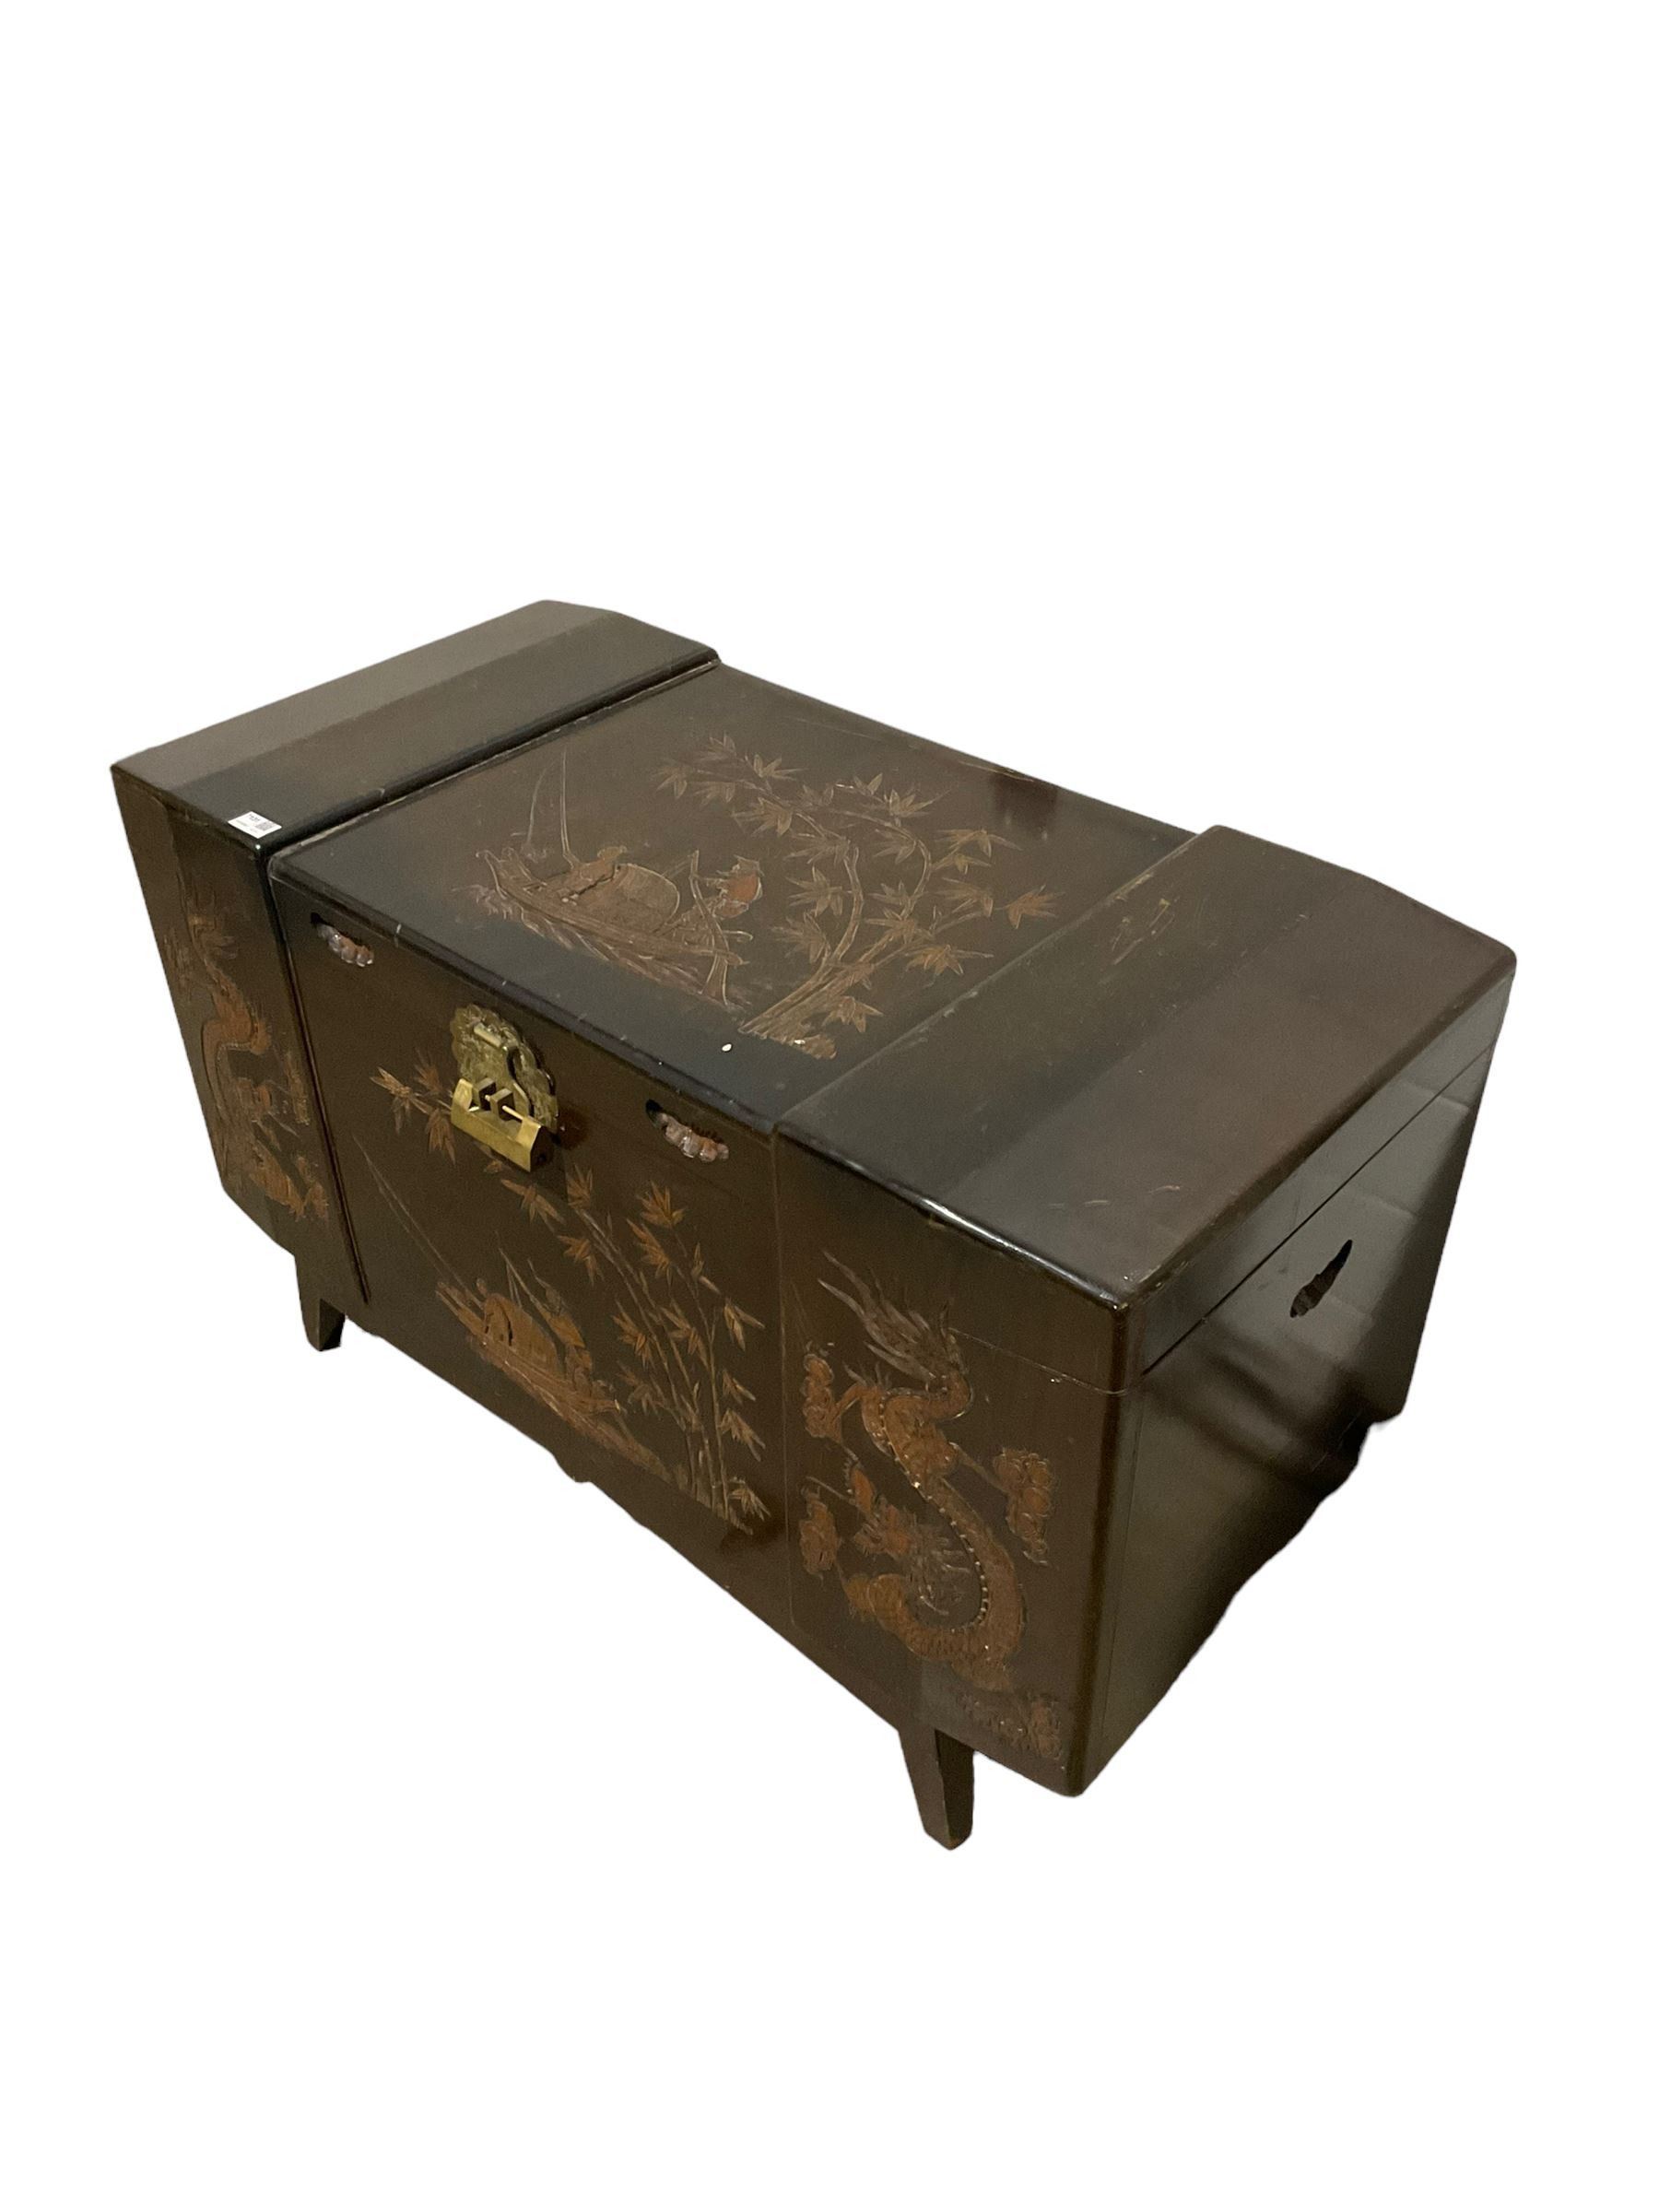 Early to mid-20th century Singaporean hardwood chest - Image 2 of 2